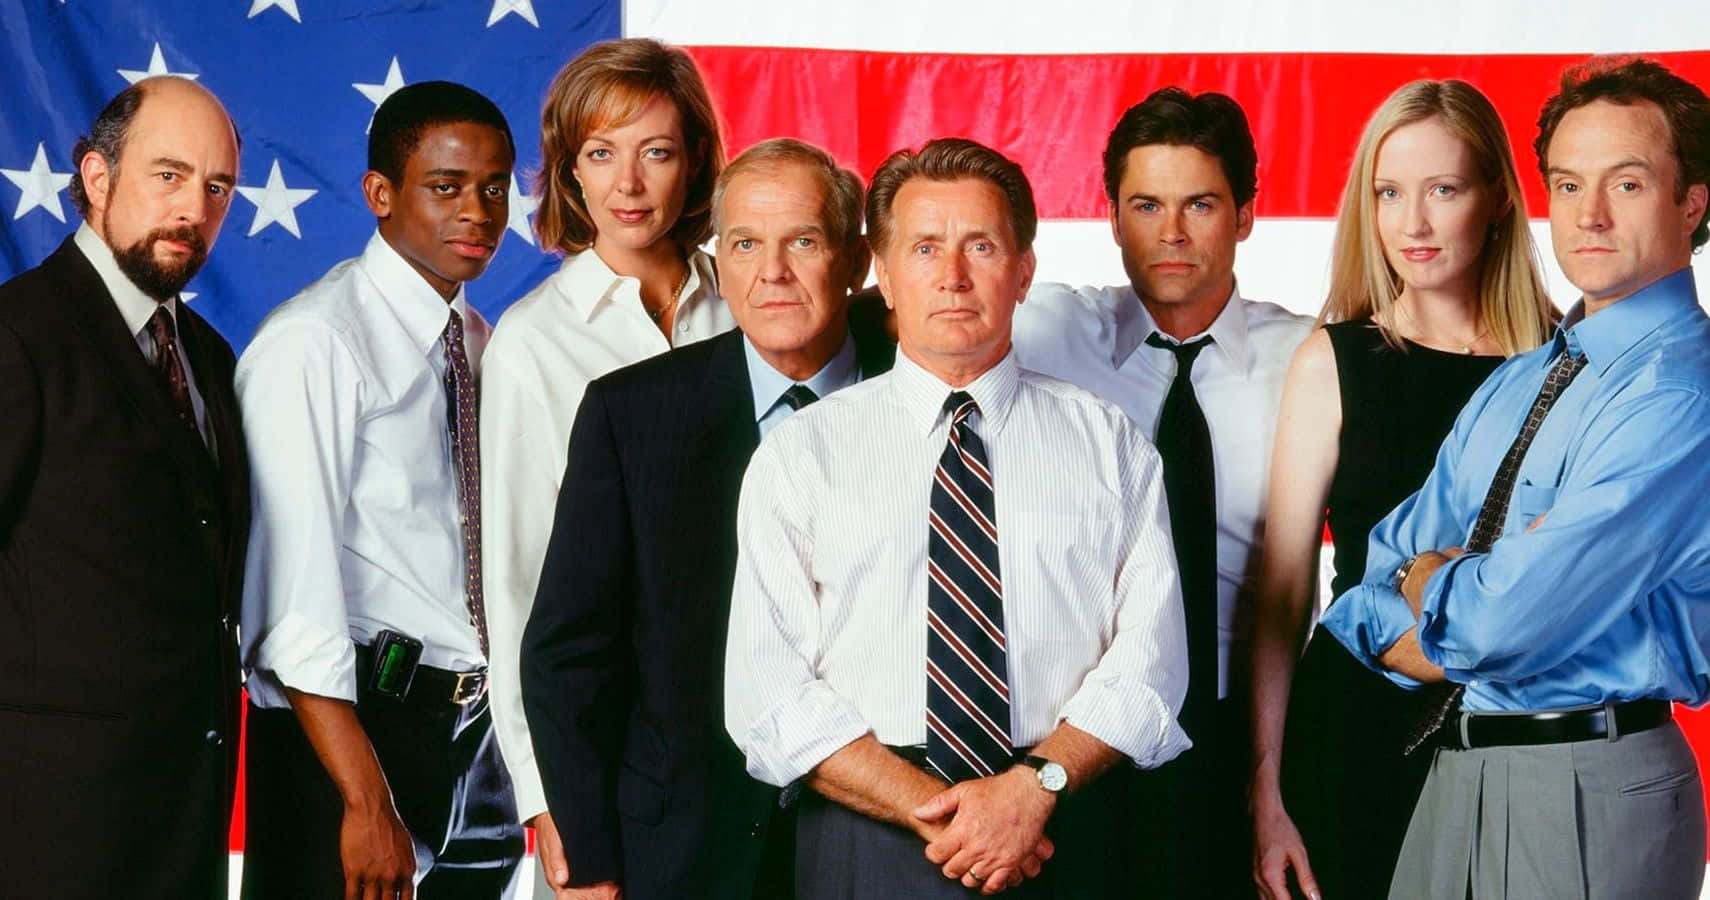 The West Wing Tv Show Cast Wallpaper